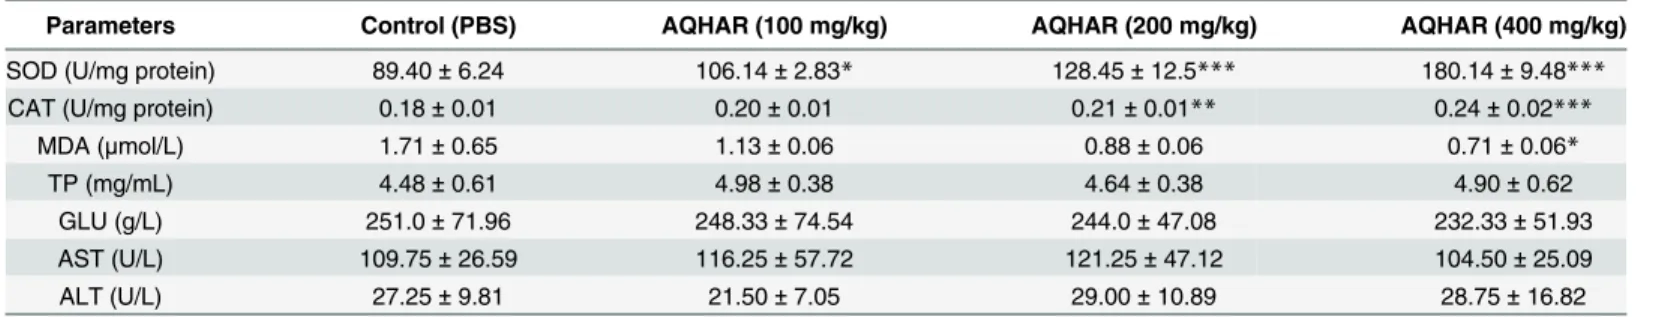 Table 1. Effect of AQHAR on antioxidant enzyme activities and biochemical parameters in mice blood.